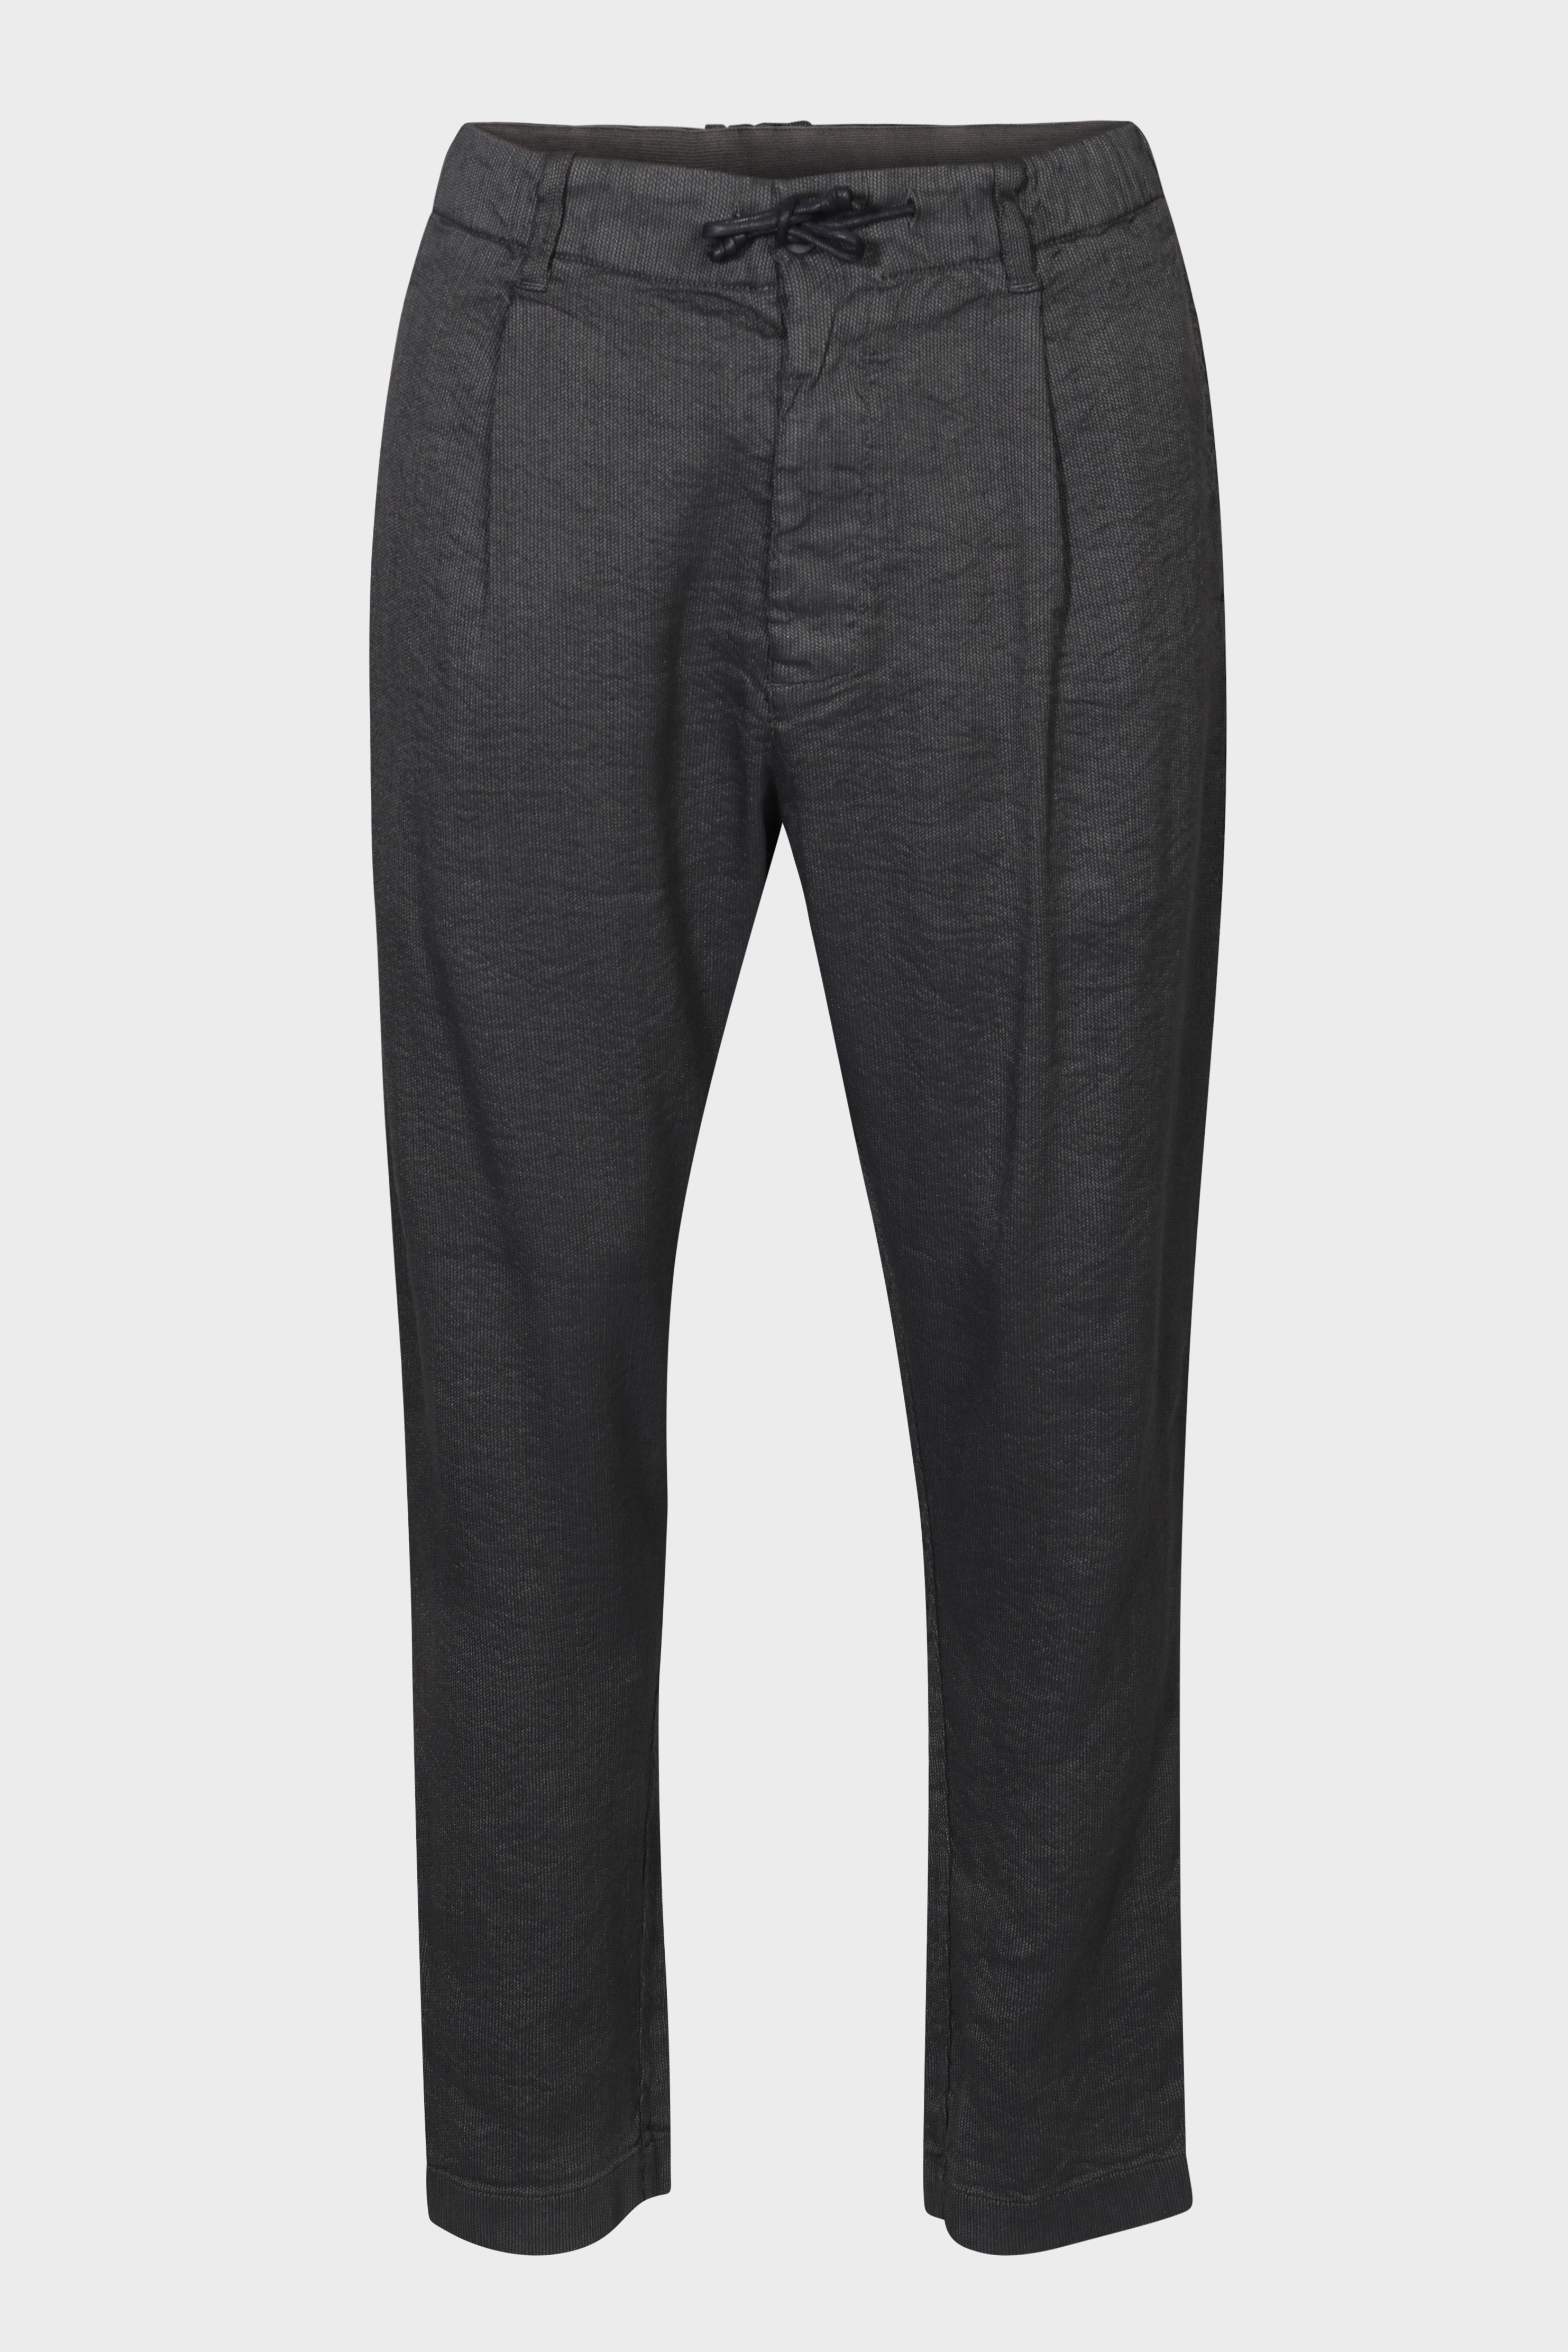 TRANSIT UOMO Structure Stretch Pant in Charcoal M